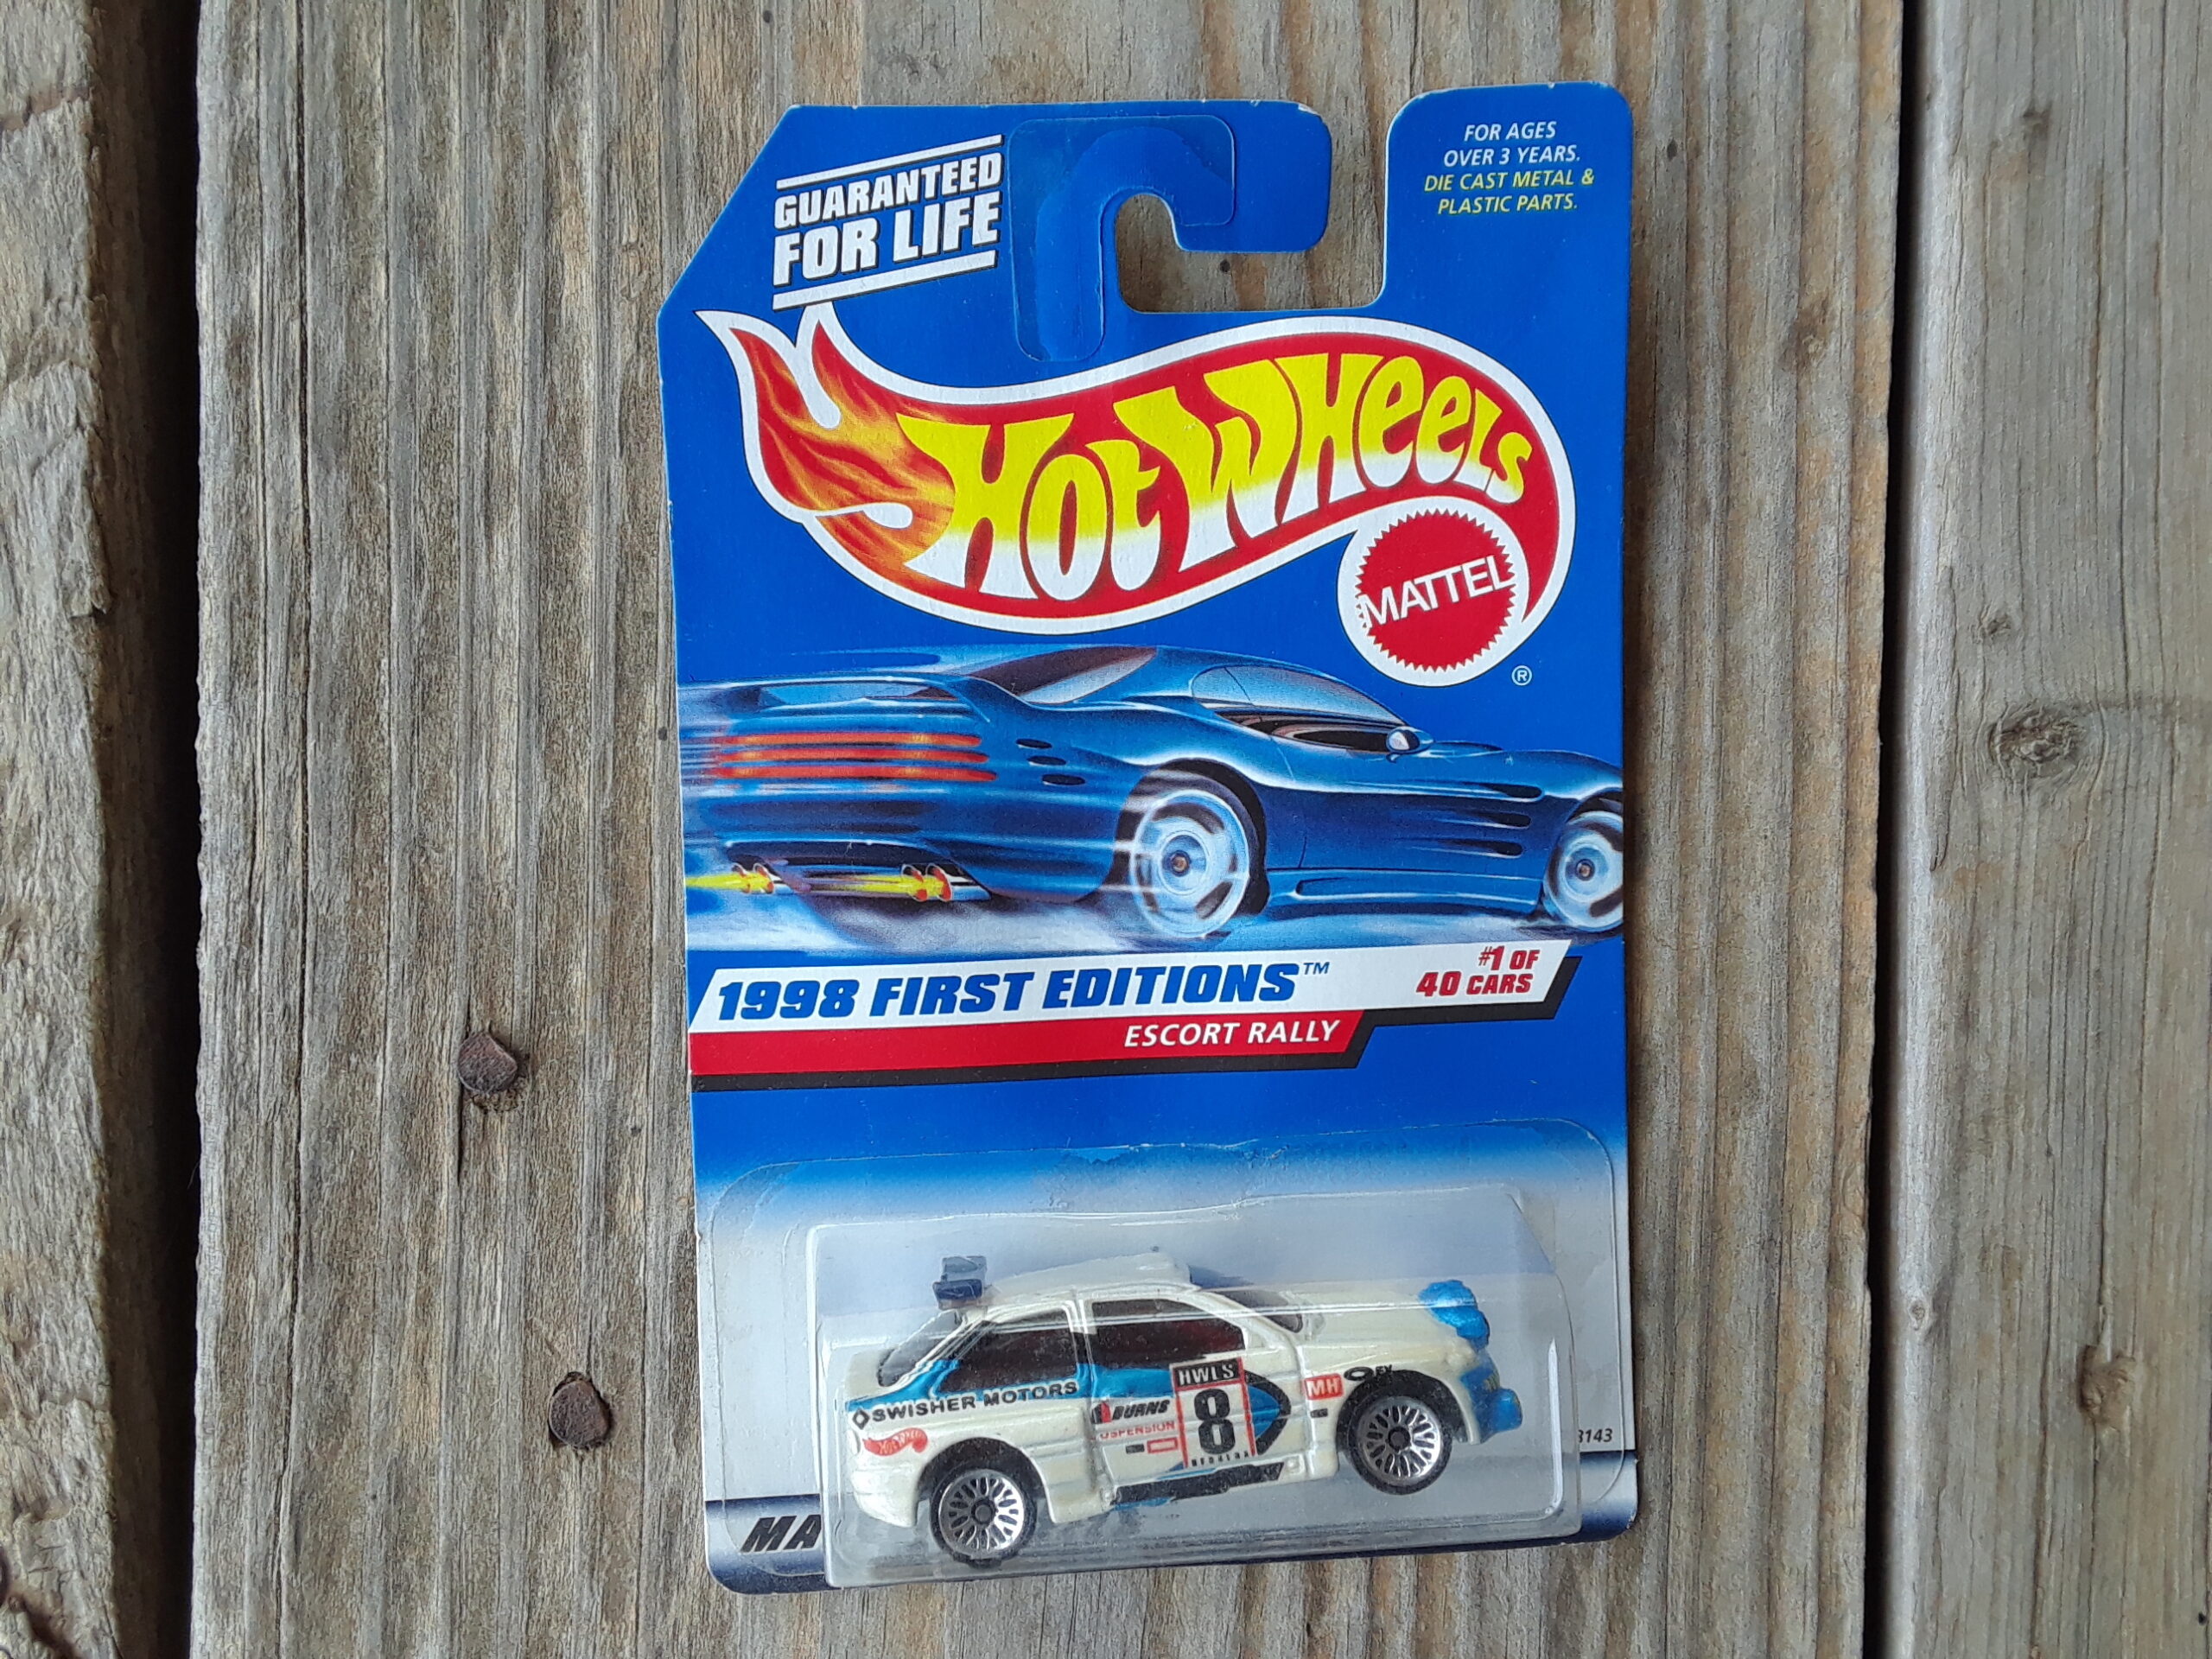 Hot Wheels 1998 First Editions Escort Rally